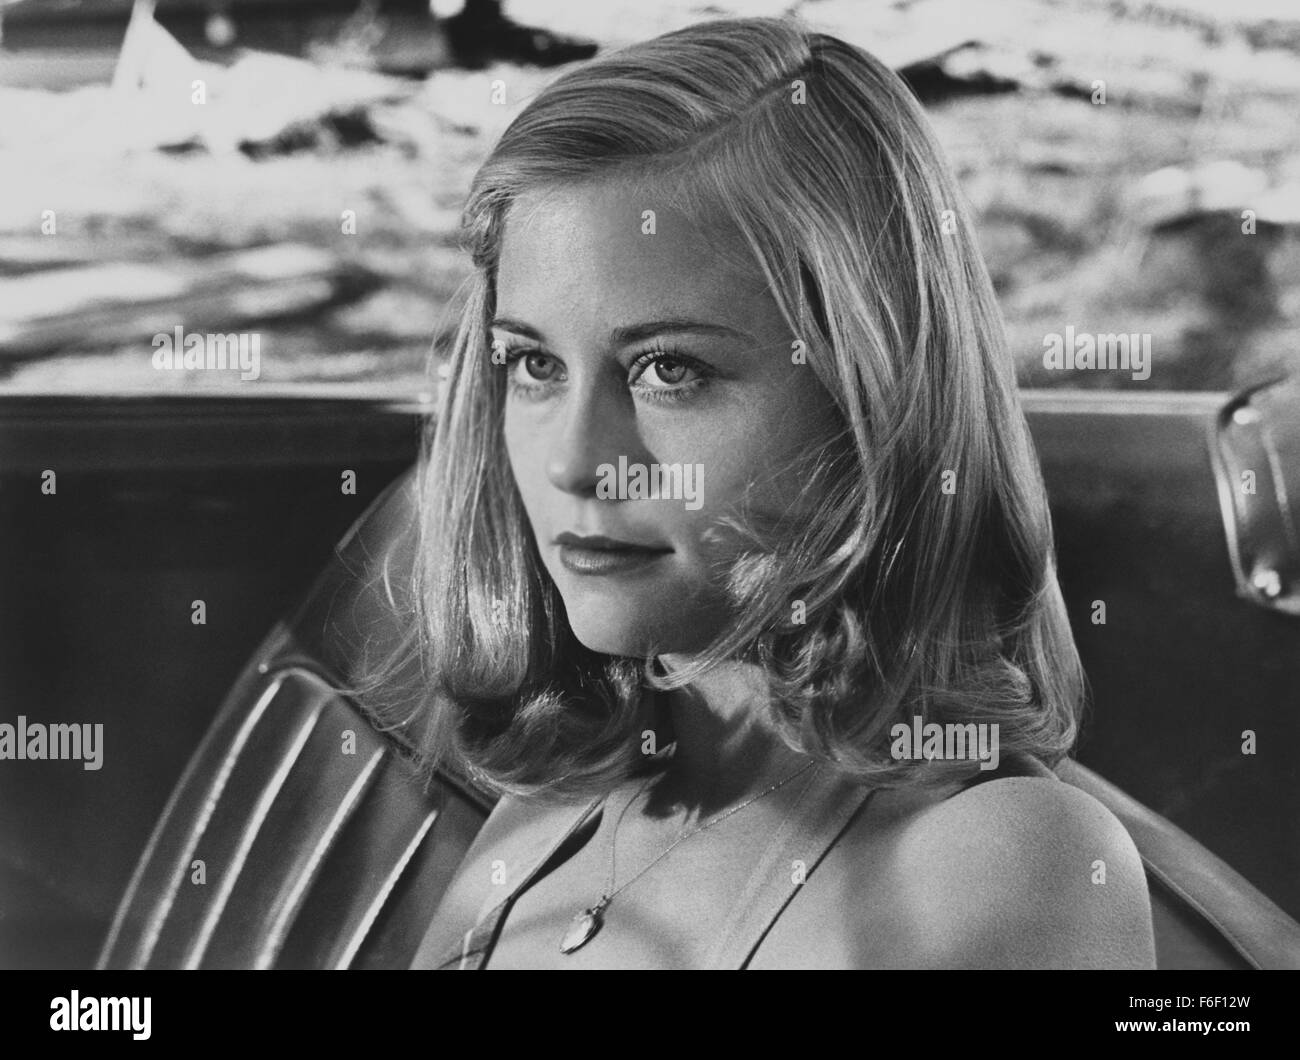 Oct 03, 1971; Archer City, TX, USA; From director Peter Bogdanovich and Columbia Pictures comes, 'The Last Picture Show,' a the story of three teenagers growing up in a small town in Texas during the 50's and the life choices they must make. Pictured is CYBILL SHEPHERD as Jacy Farrow. Stock Photo